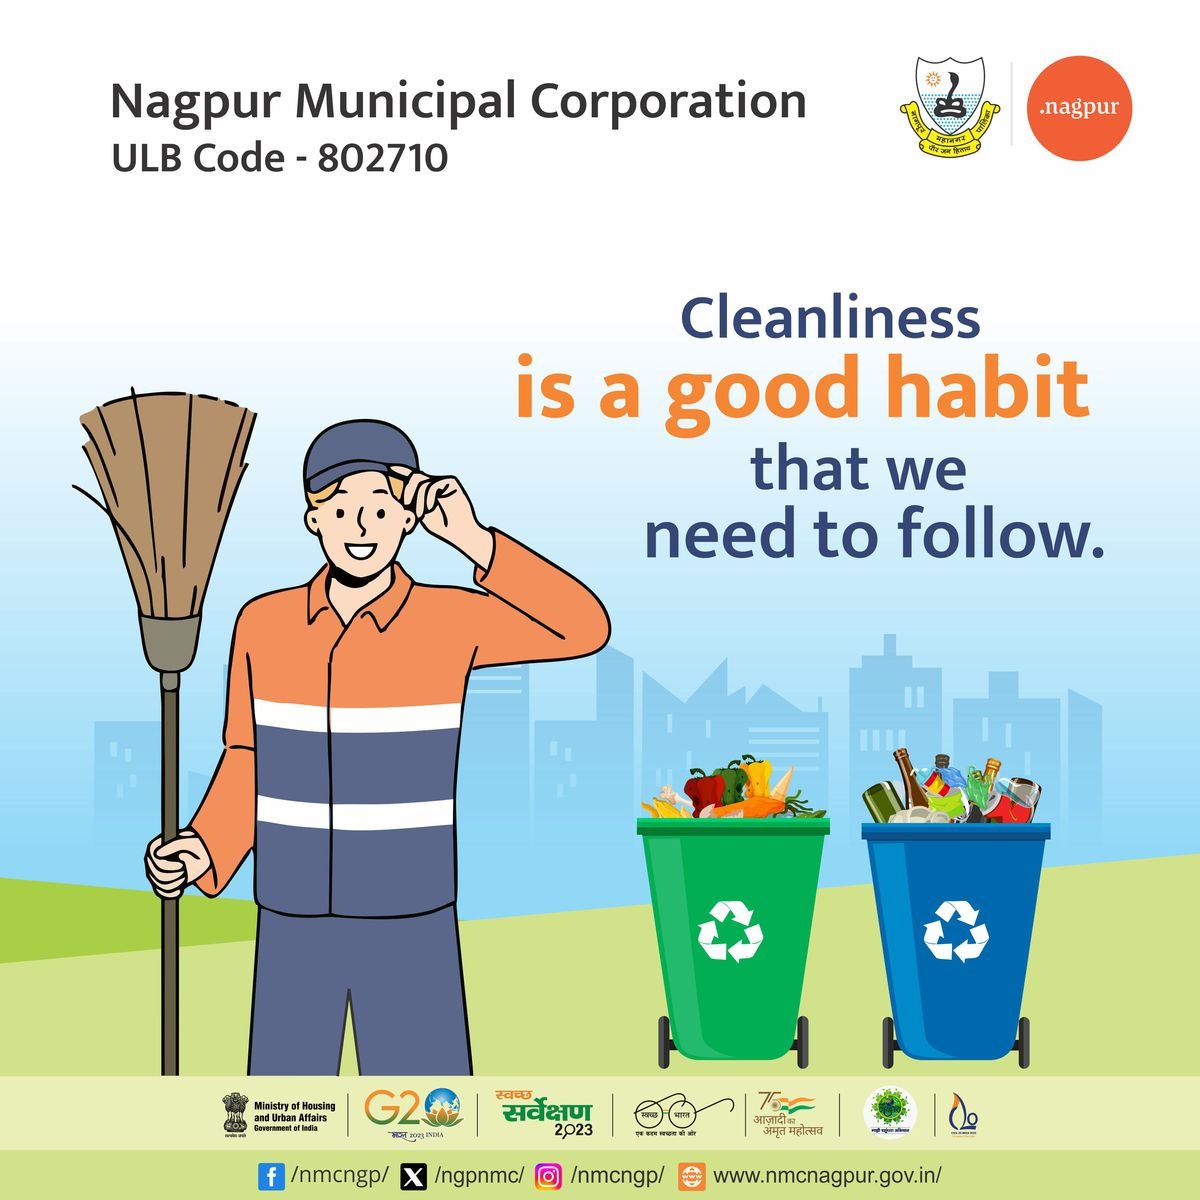 Cleanliness is a good habit that we need to follow. #MissionLiFE #ChooseLiFE #environment #climatechange #gogreen #MycityMyResponsibility #CleanNagpur #HaraGeelaSookhaNeela